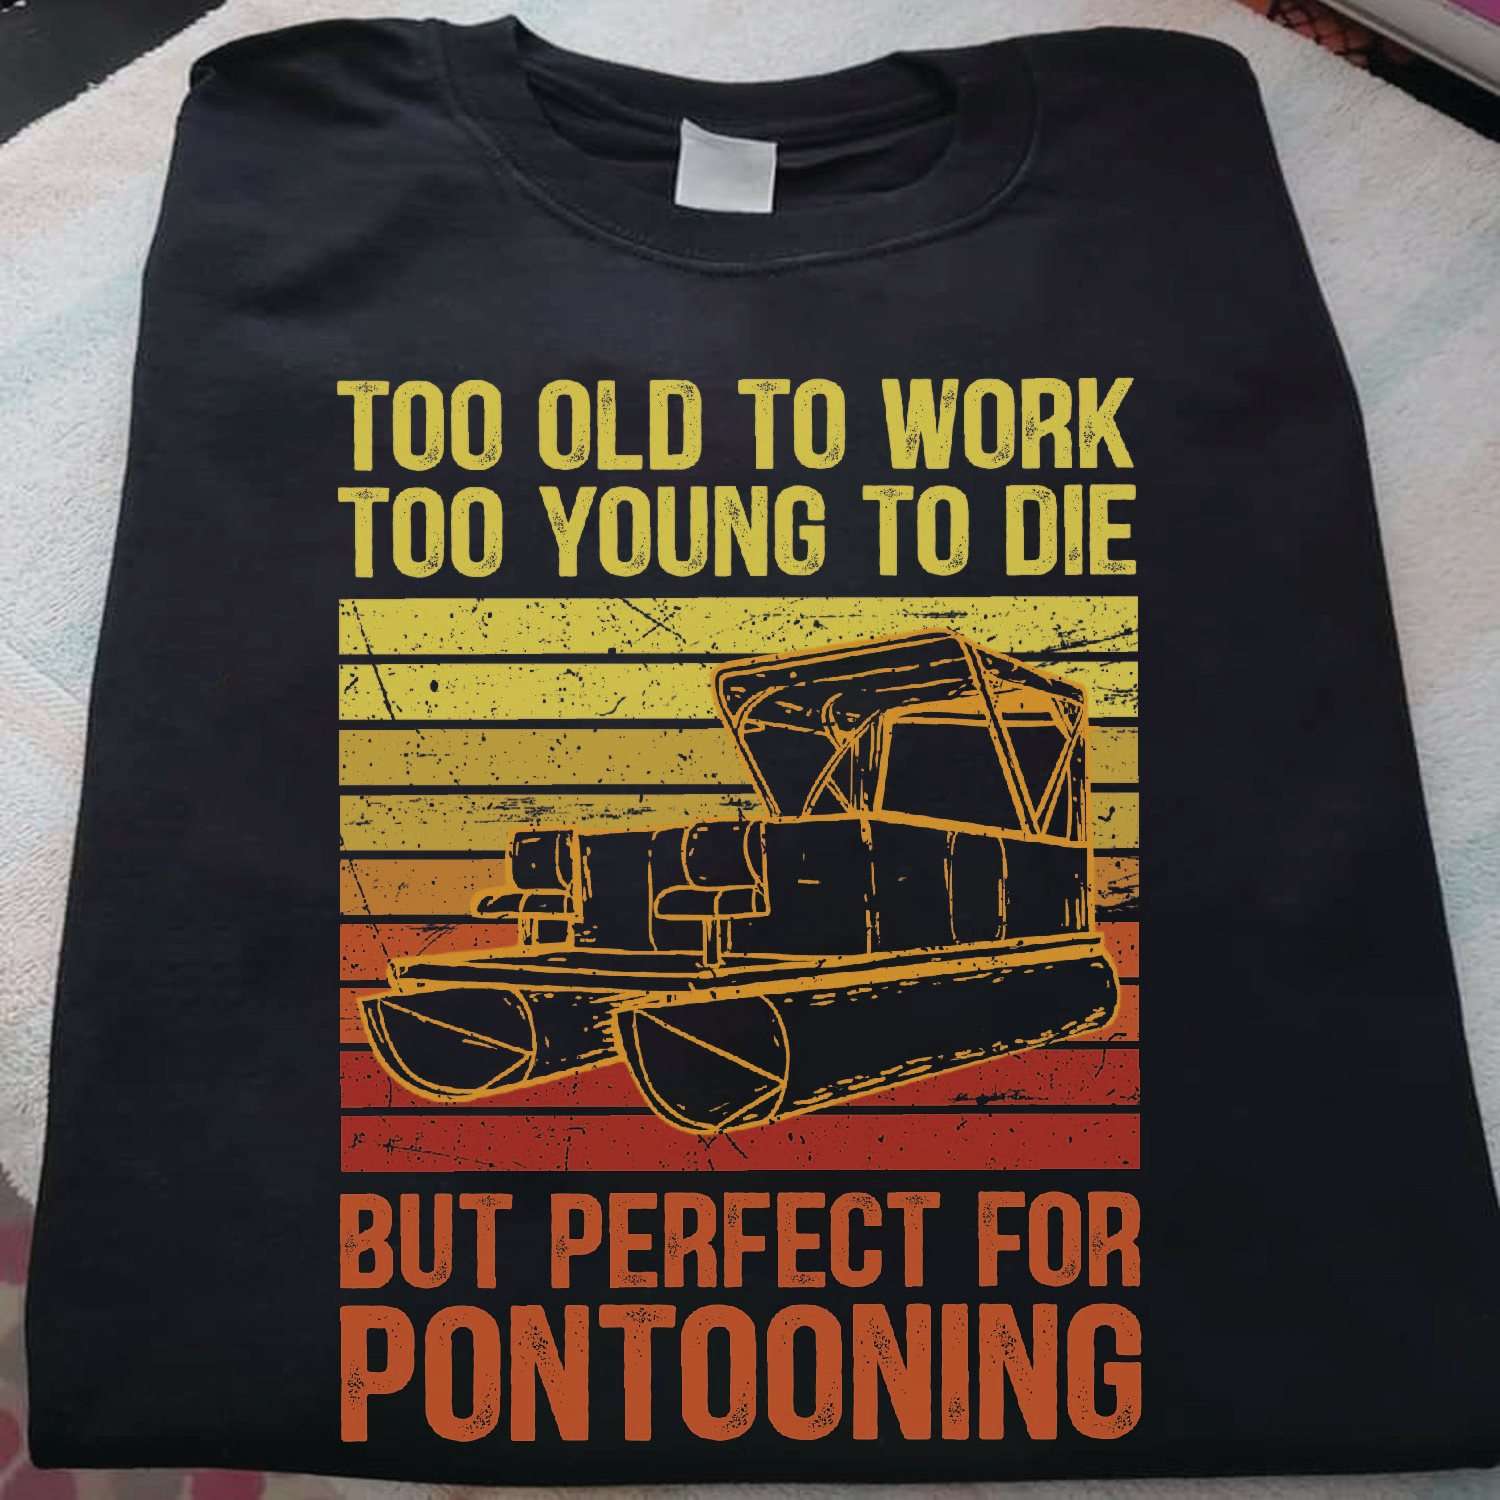 Too old to work, too young to die but perfect for pontooning